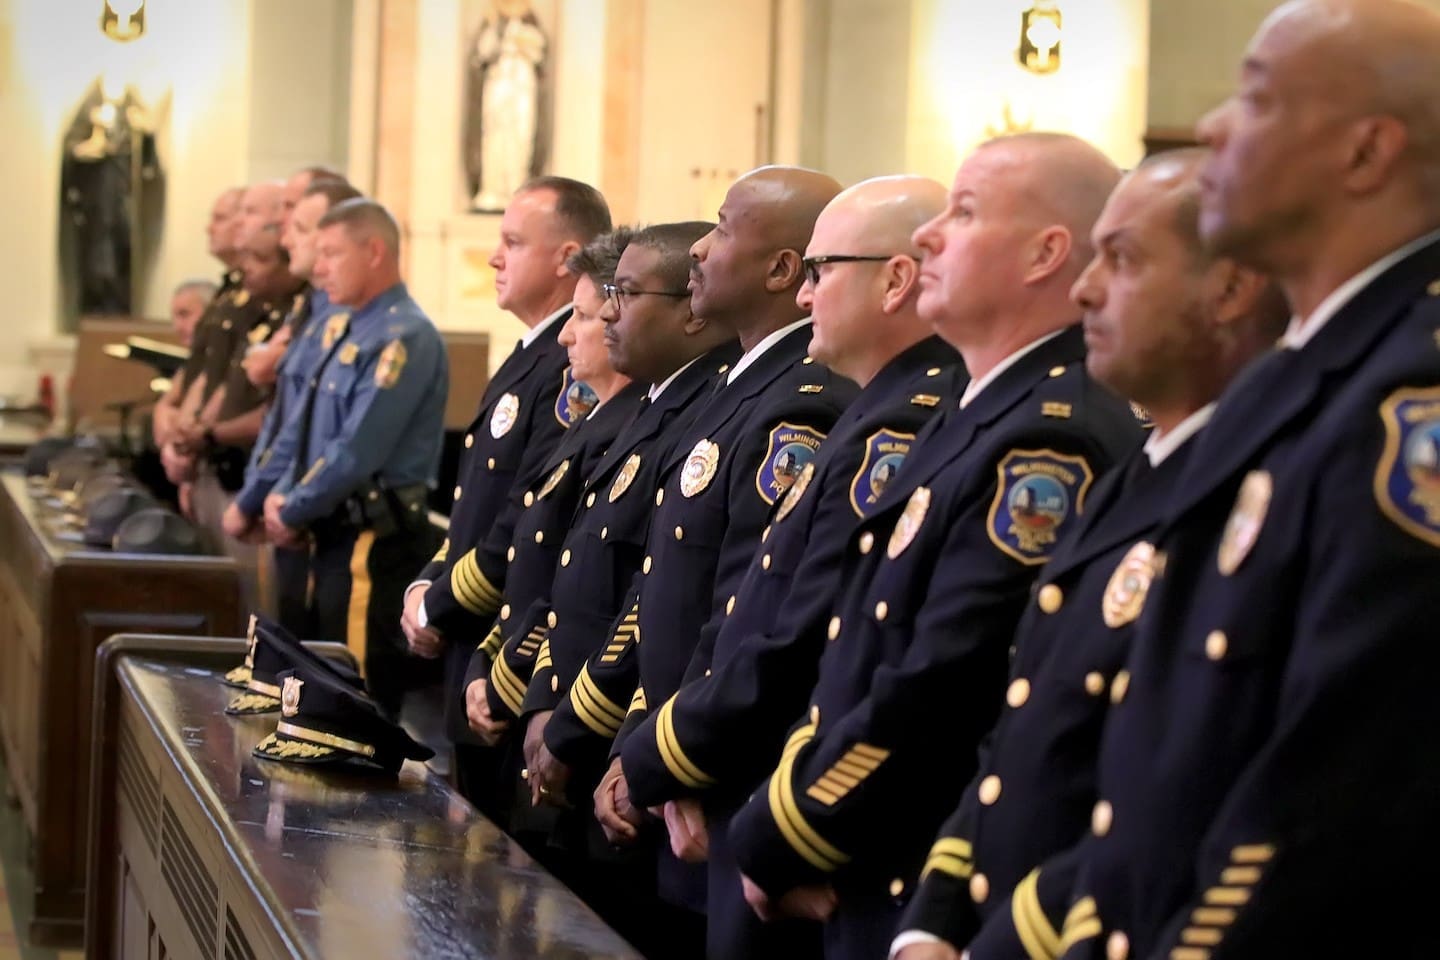 The 2022 Catholic Diocese of Wilmington Blue Mass for law enforcement, fire, emergency medical services and military. (thedialog.org)